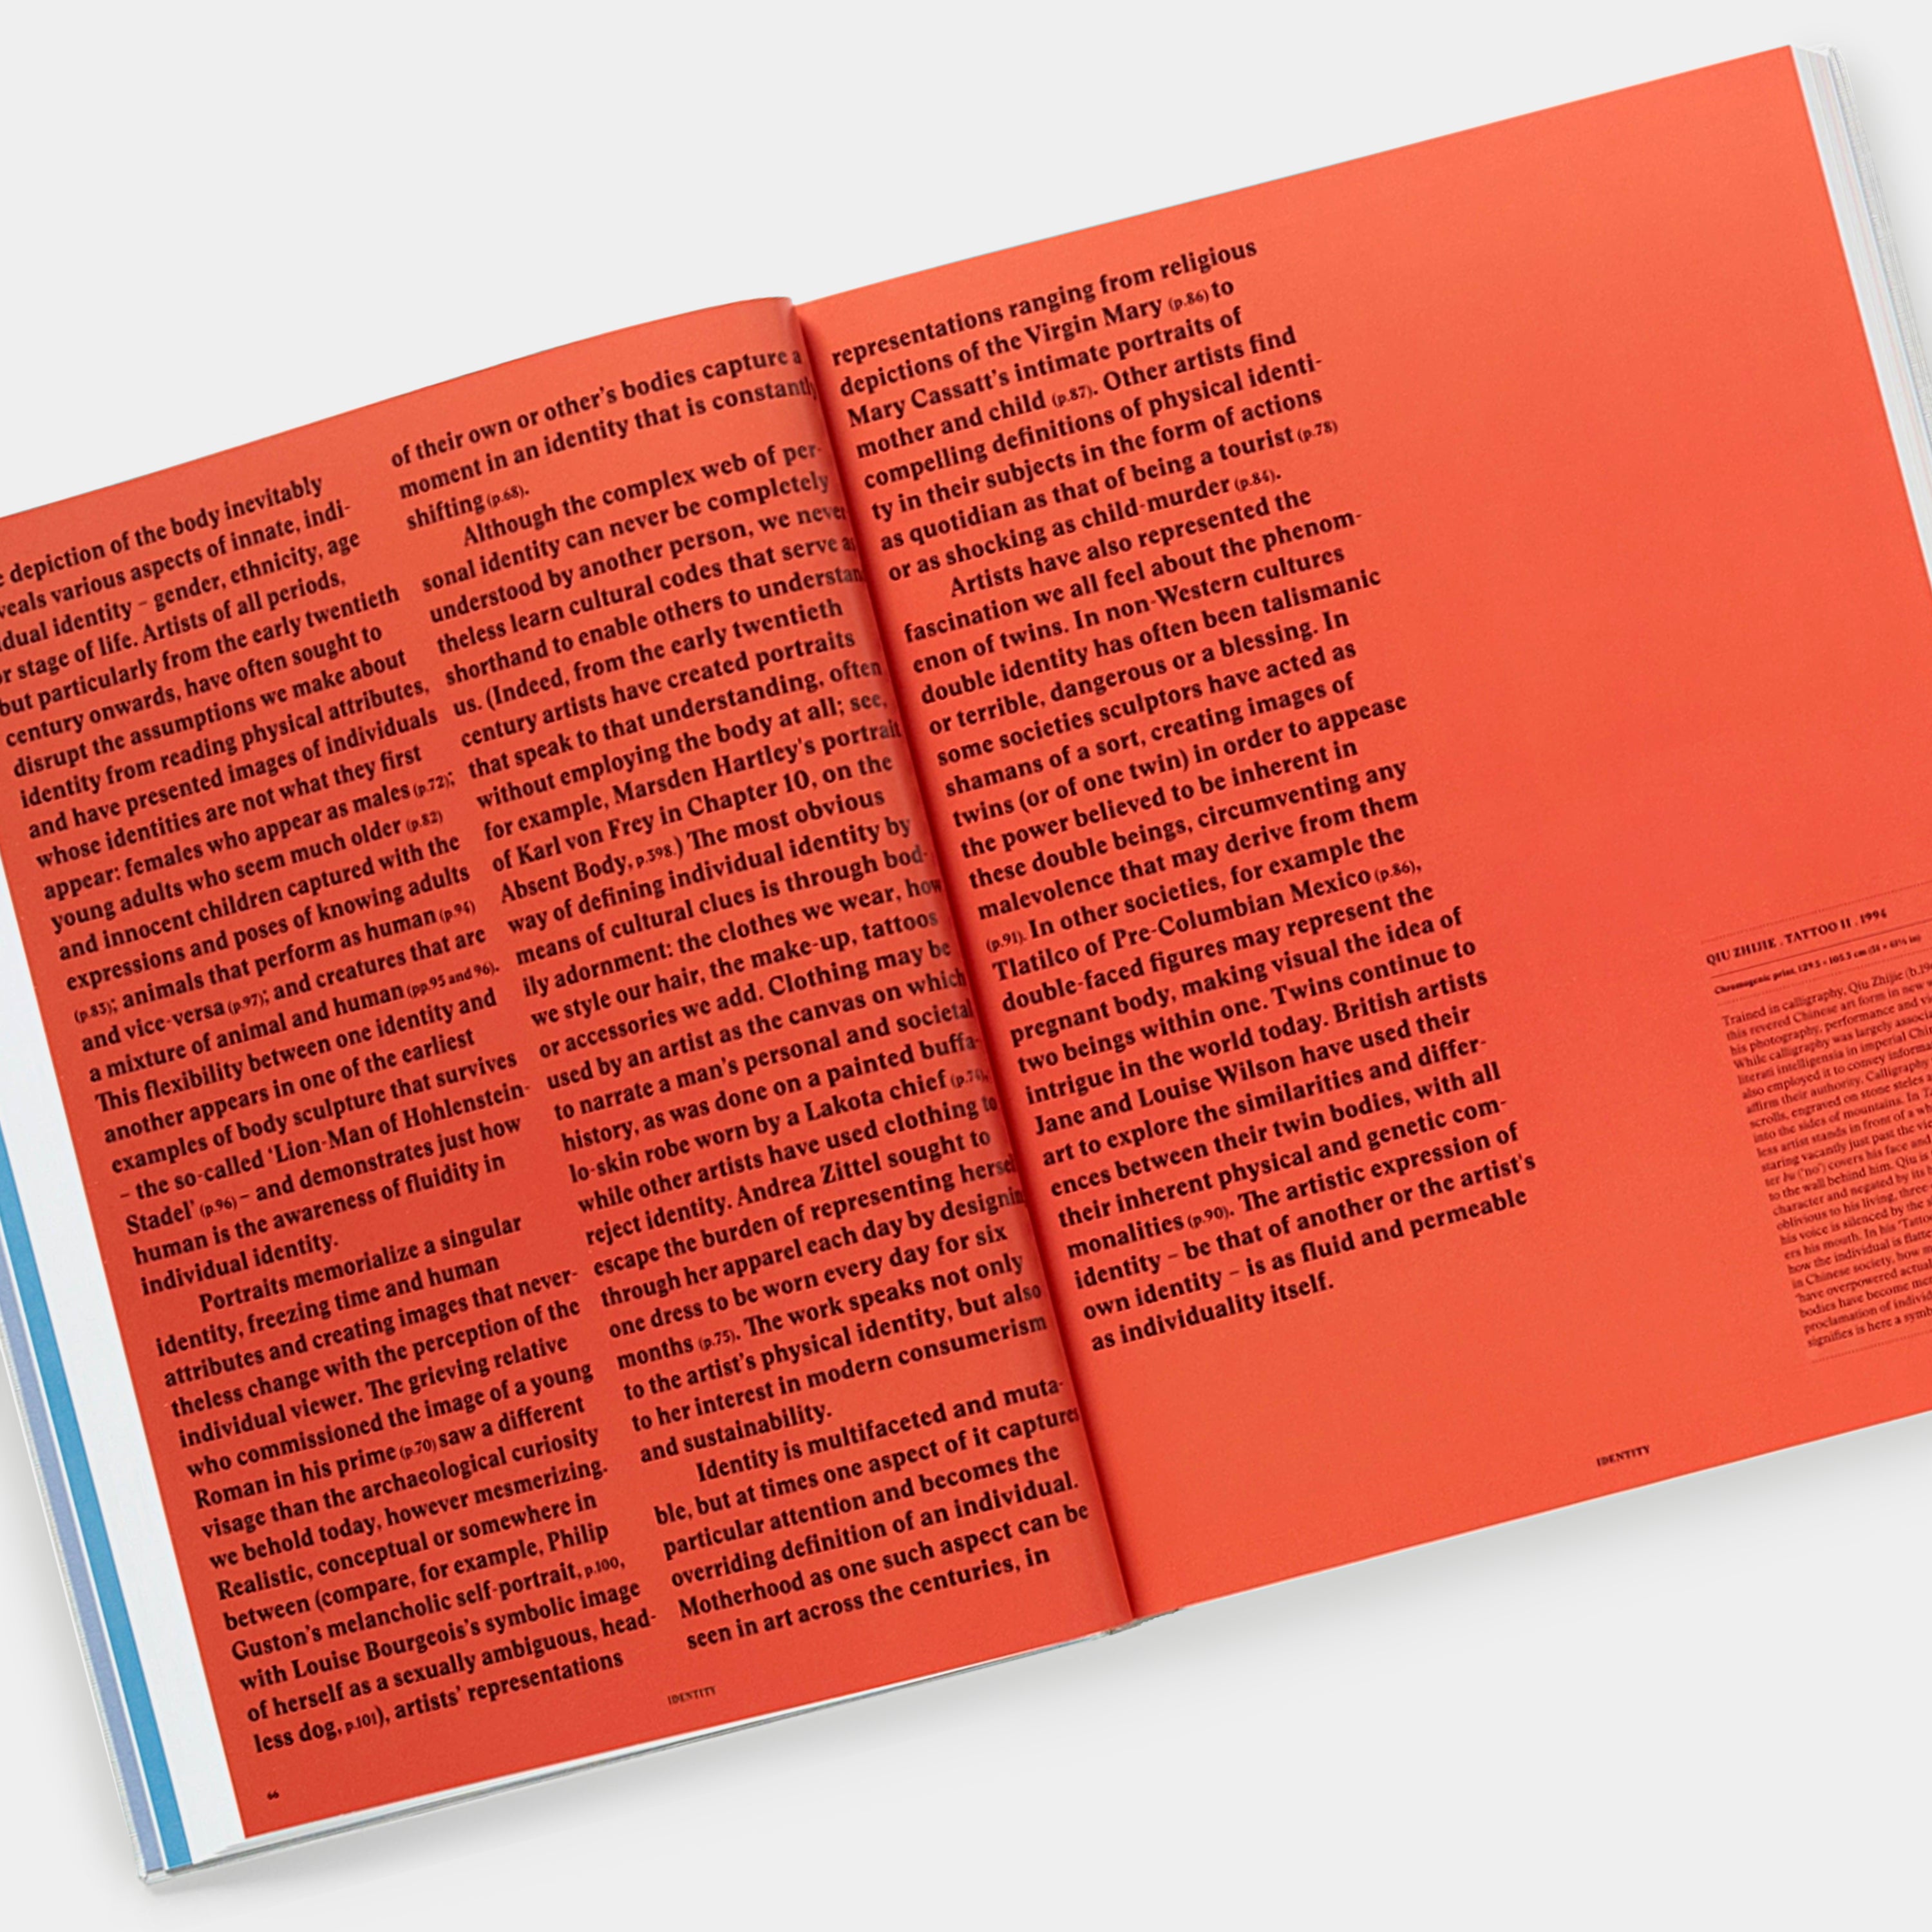 Body of Art: Conceived and edited by Phaidon Editors Phaidon Book